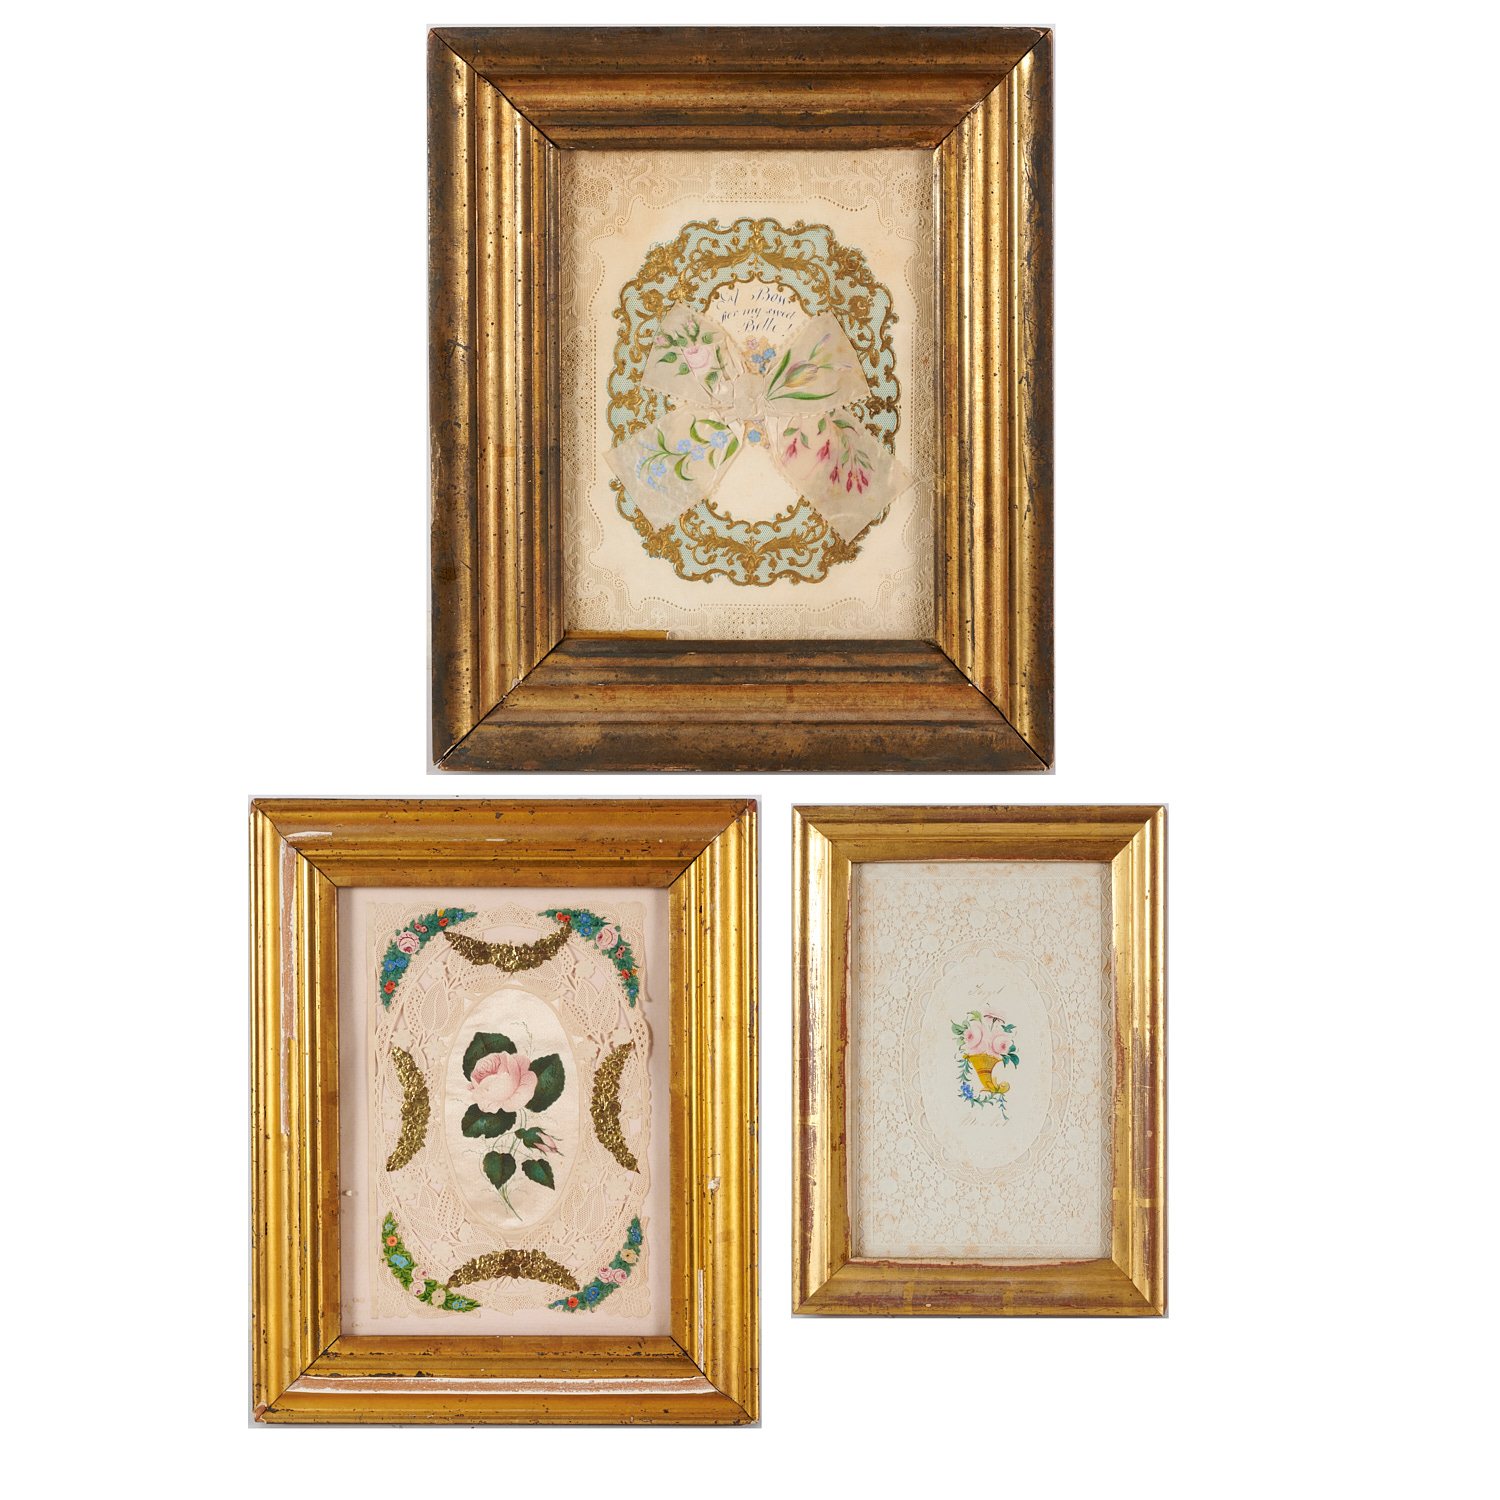 (3) VICTORIAN PAINTED PAPER LACE